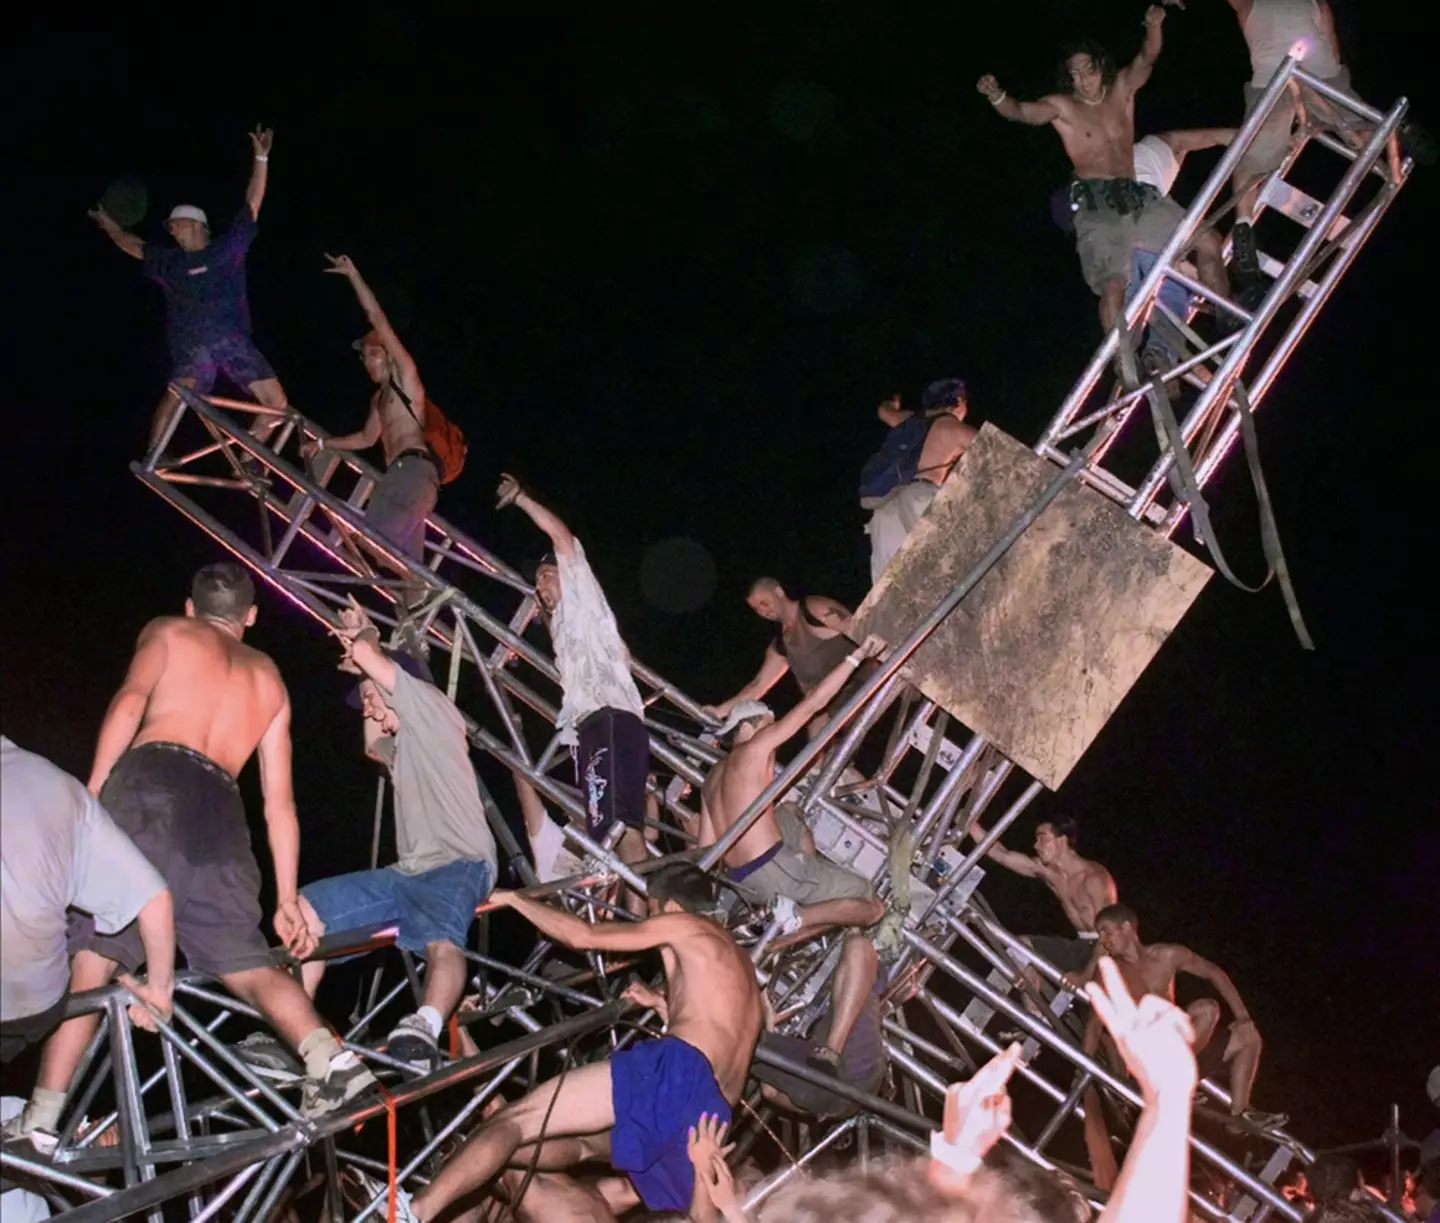 Festivalgoers started tearing the site down.